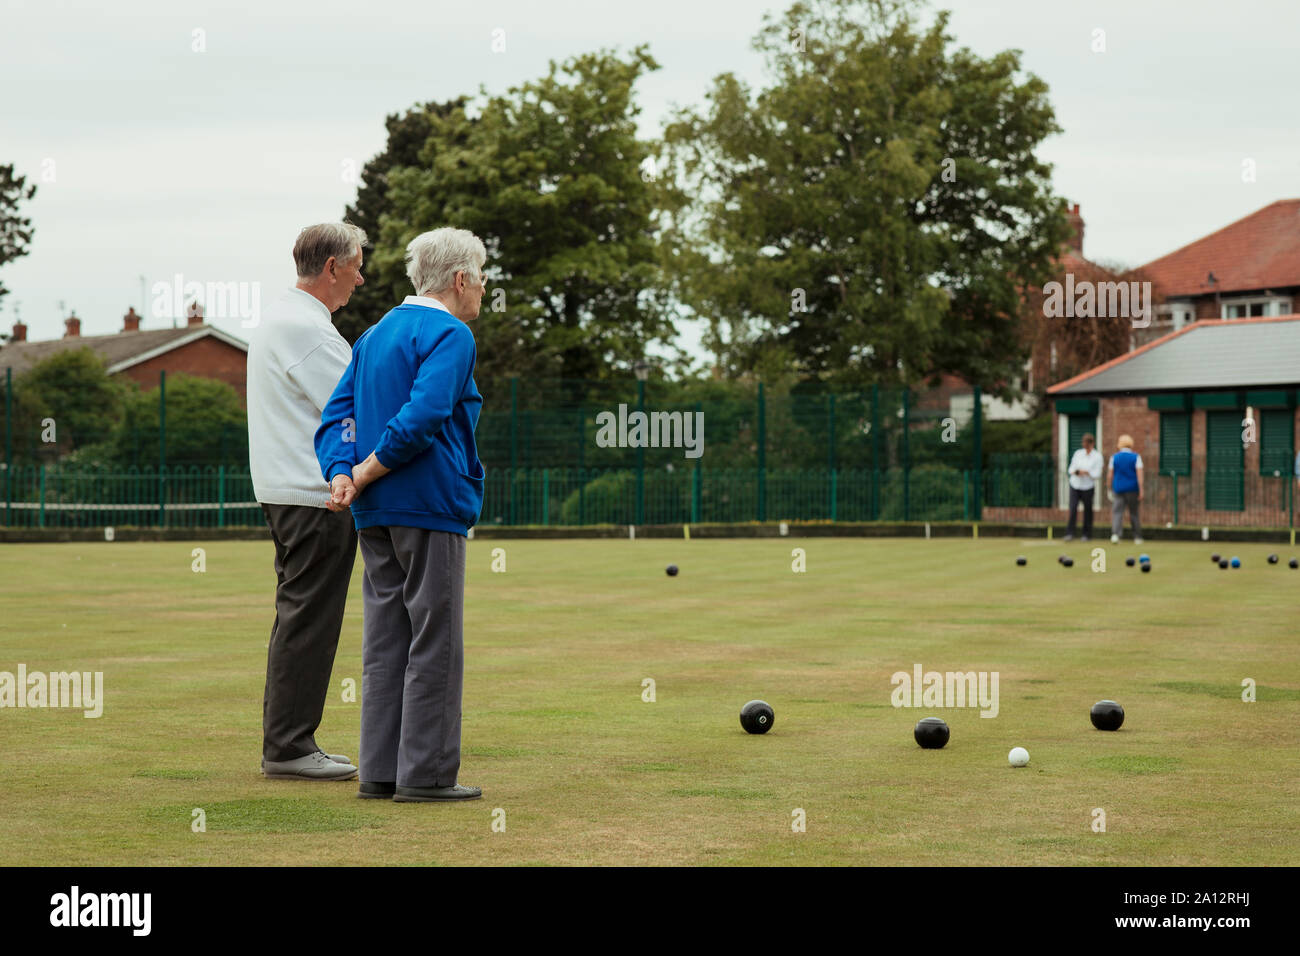 A rear view shot of senior adults spectating a lawn bowling game, standing with their hands behind their back. Stock Photo